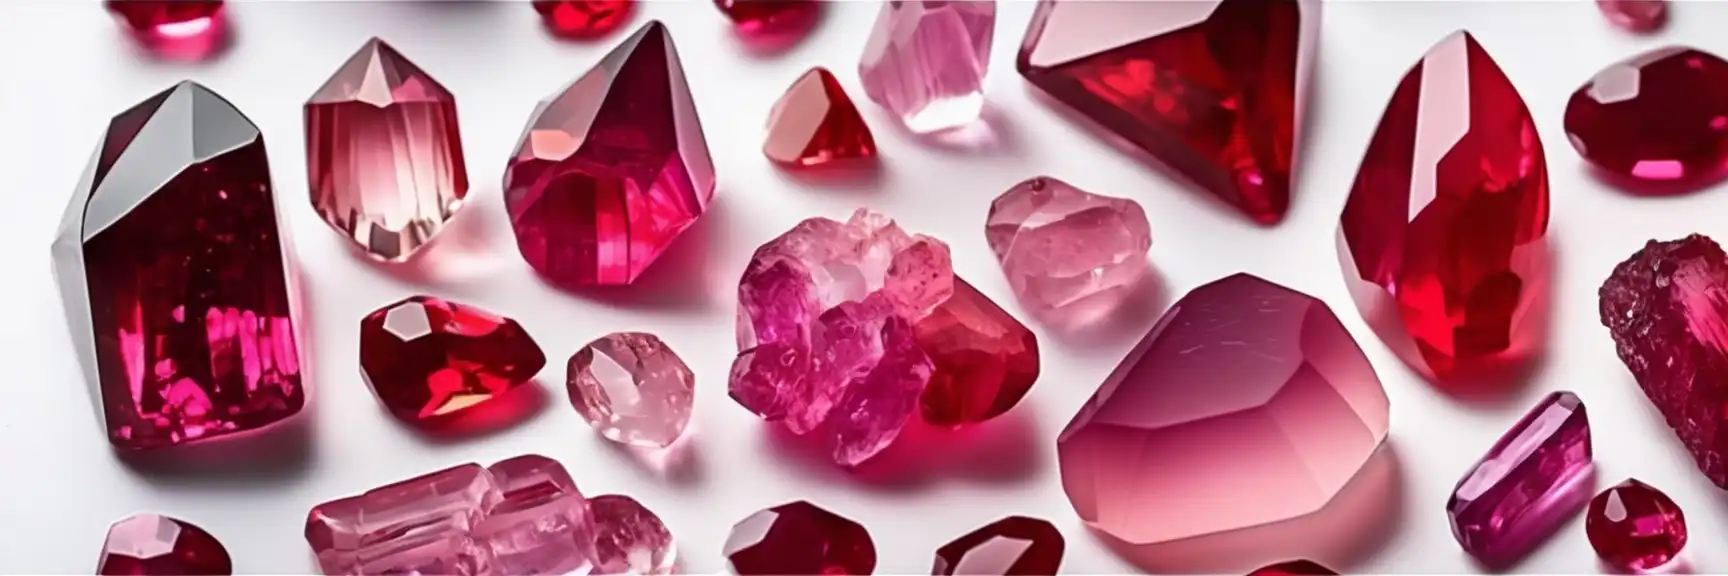 Tourmaline red and pink - Rubellite